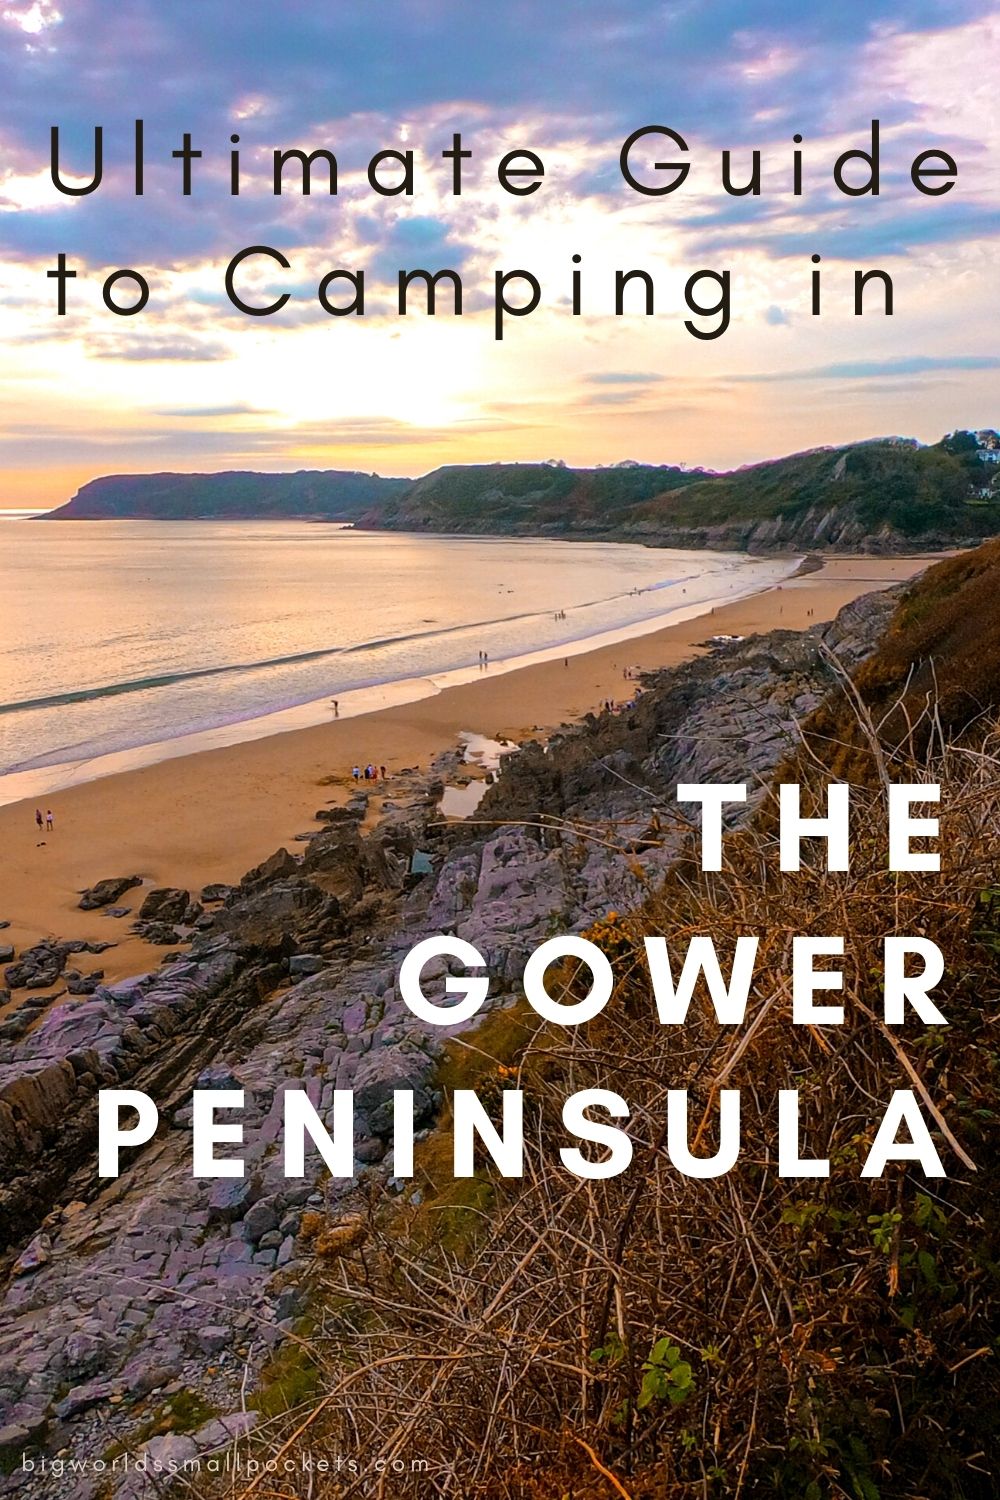 The Complete Guide to Camping in Camping in the Gower